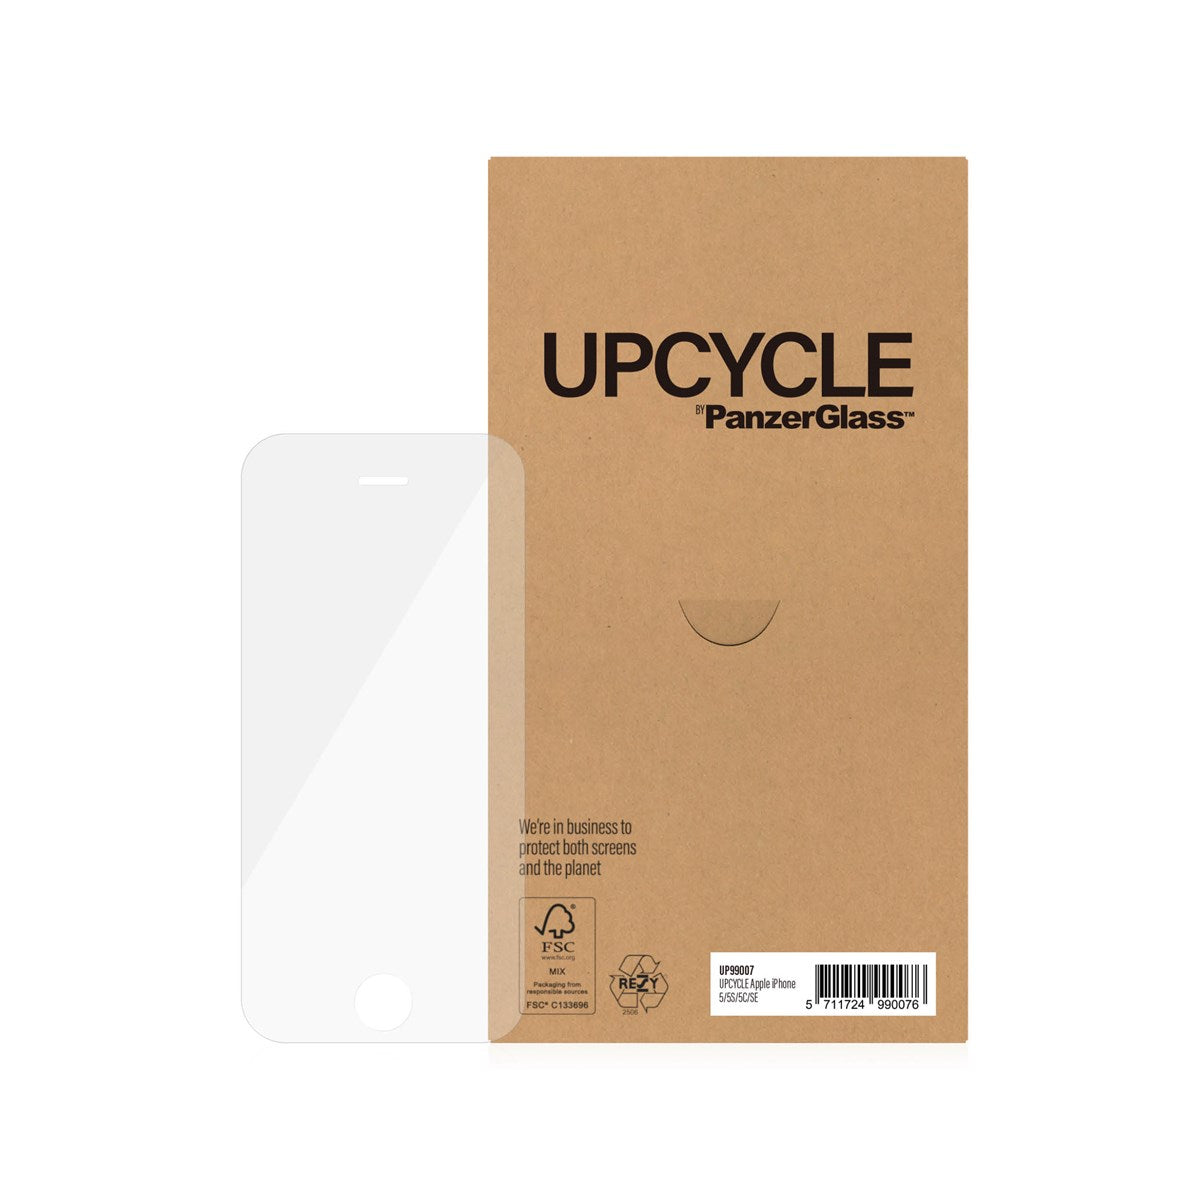 Upcycle by PanzerGlass Screen Protector Glass For Apple iPhone 5 | 5S | 5C | SE | Clear New - Sealed